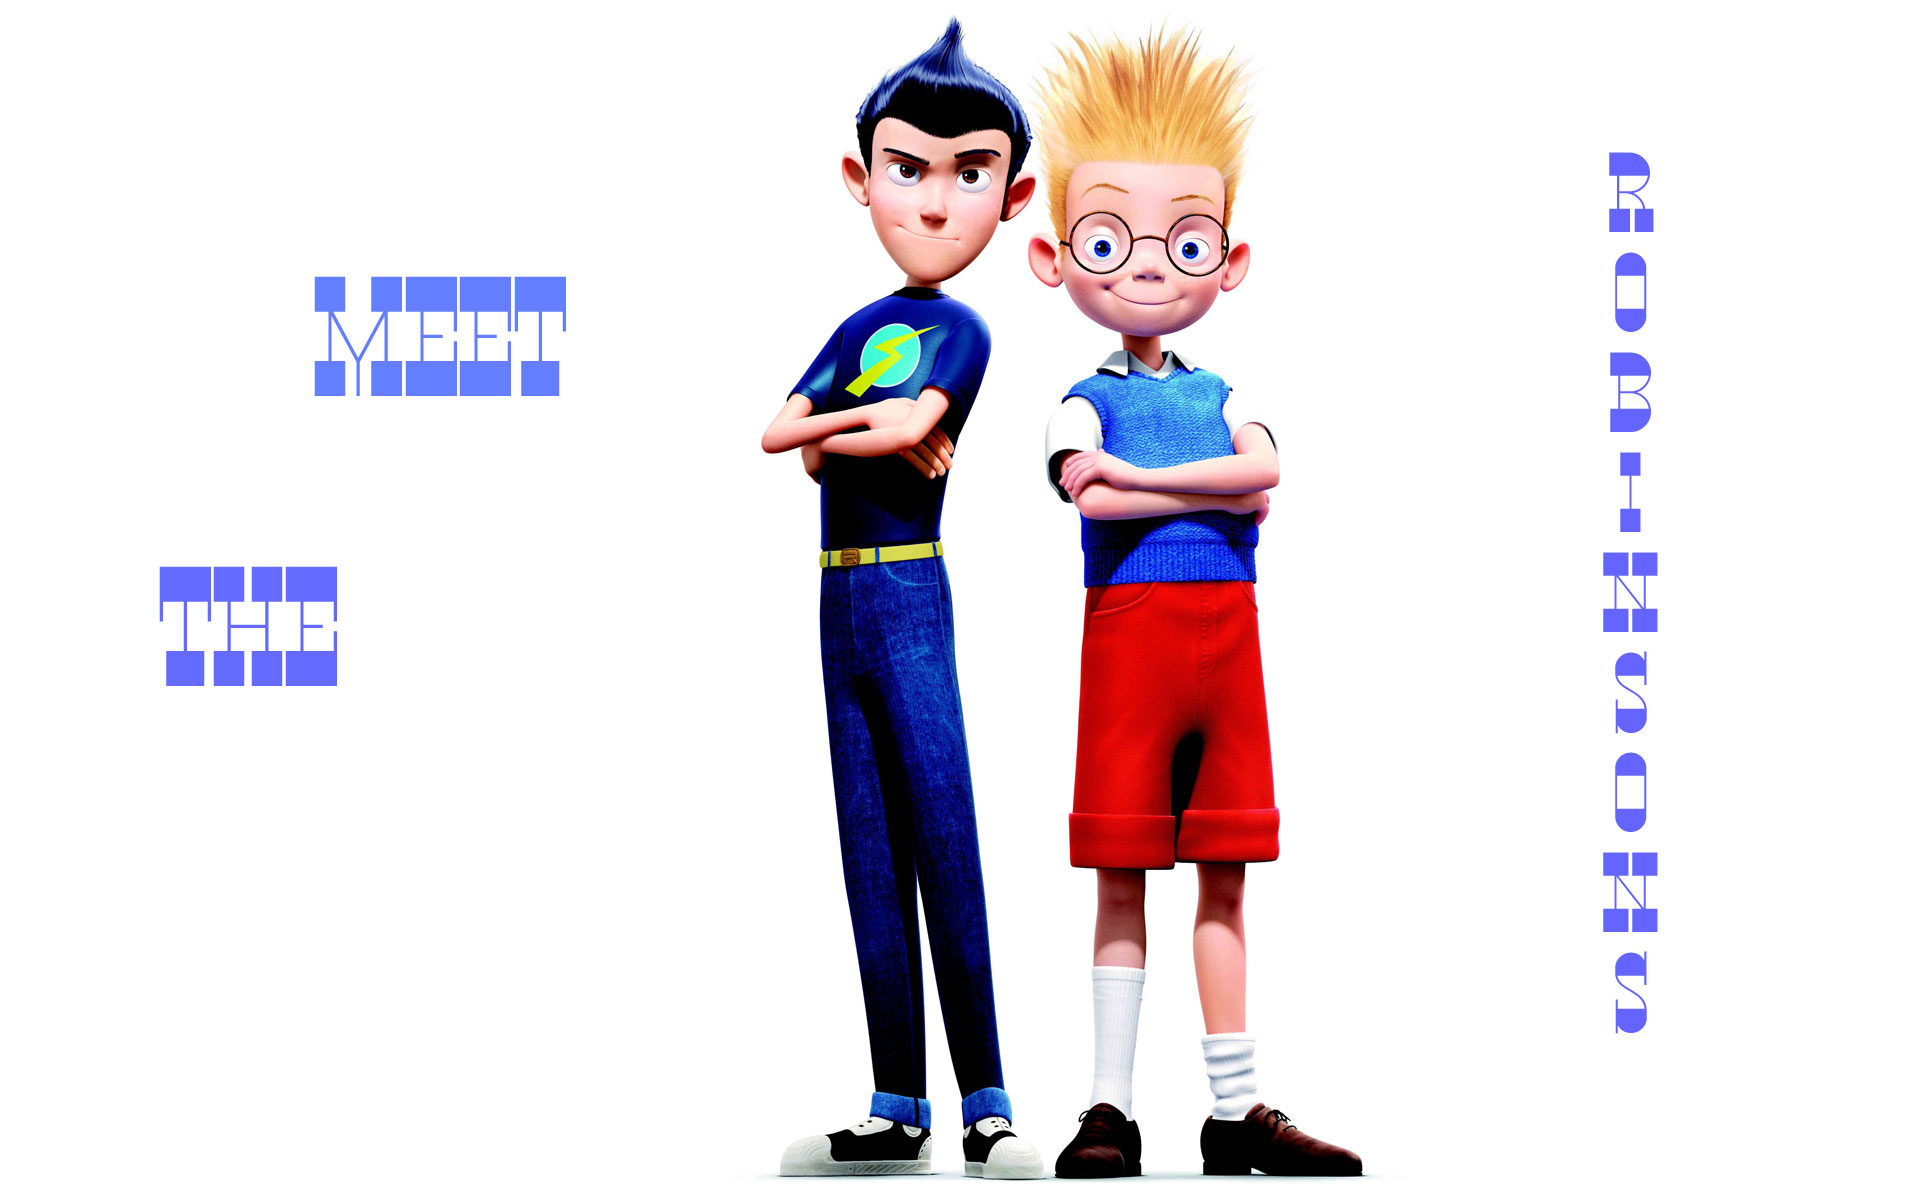 Movie Meet The Robinsons HD Wallpaper | Background Image